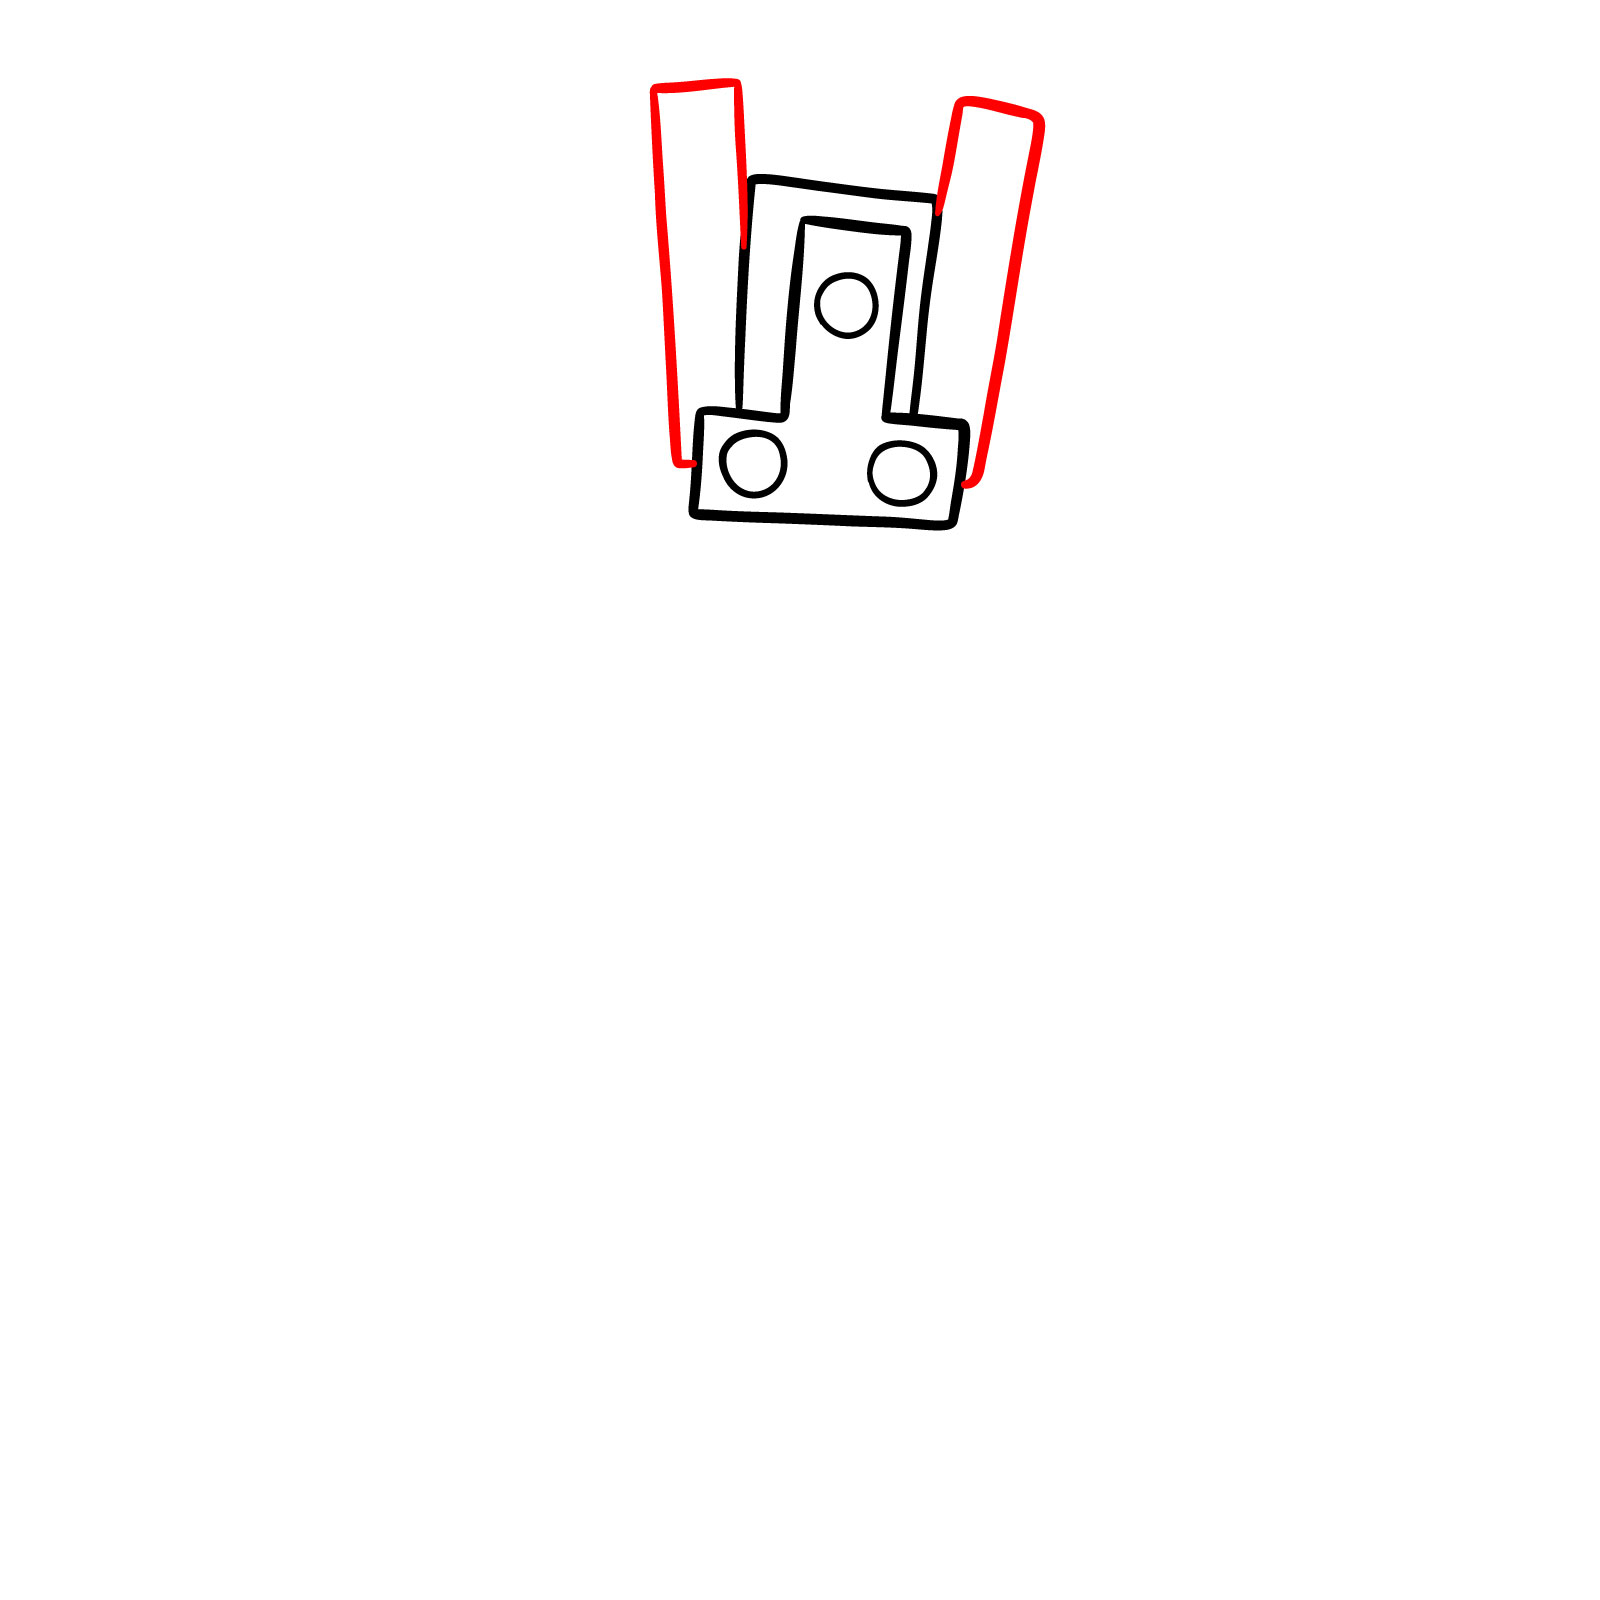 Sketching elongated rectangular boxes to represent additional speakers - step 03